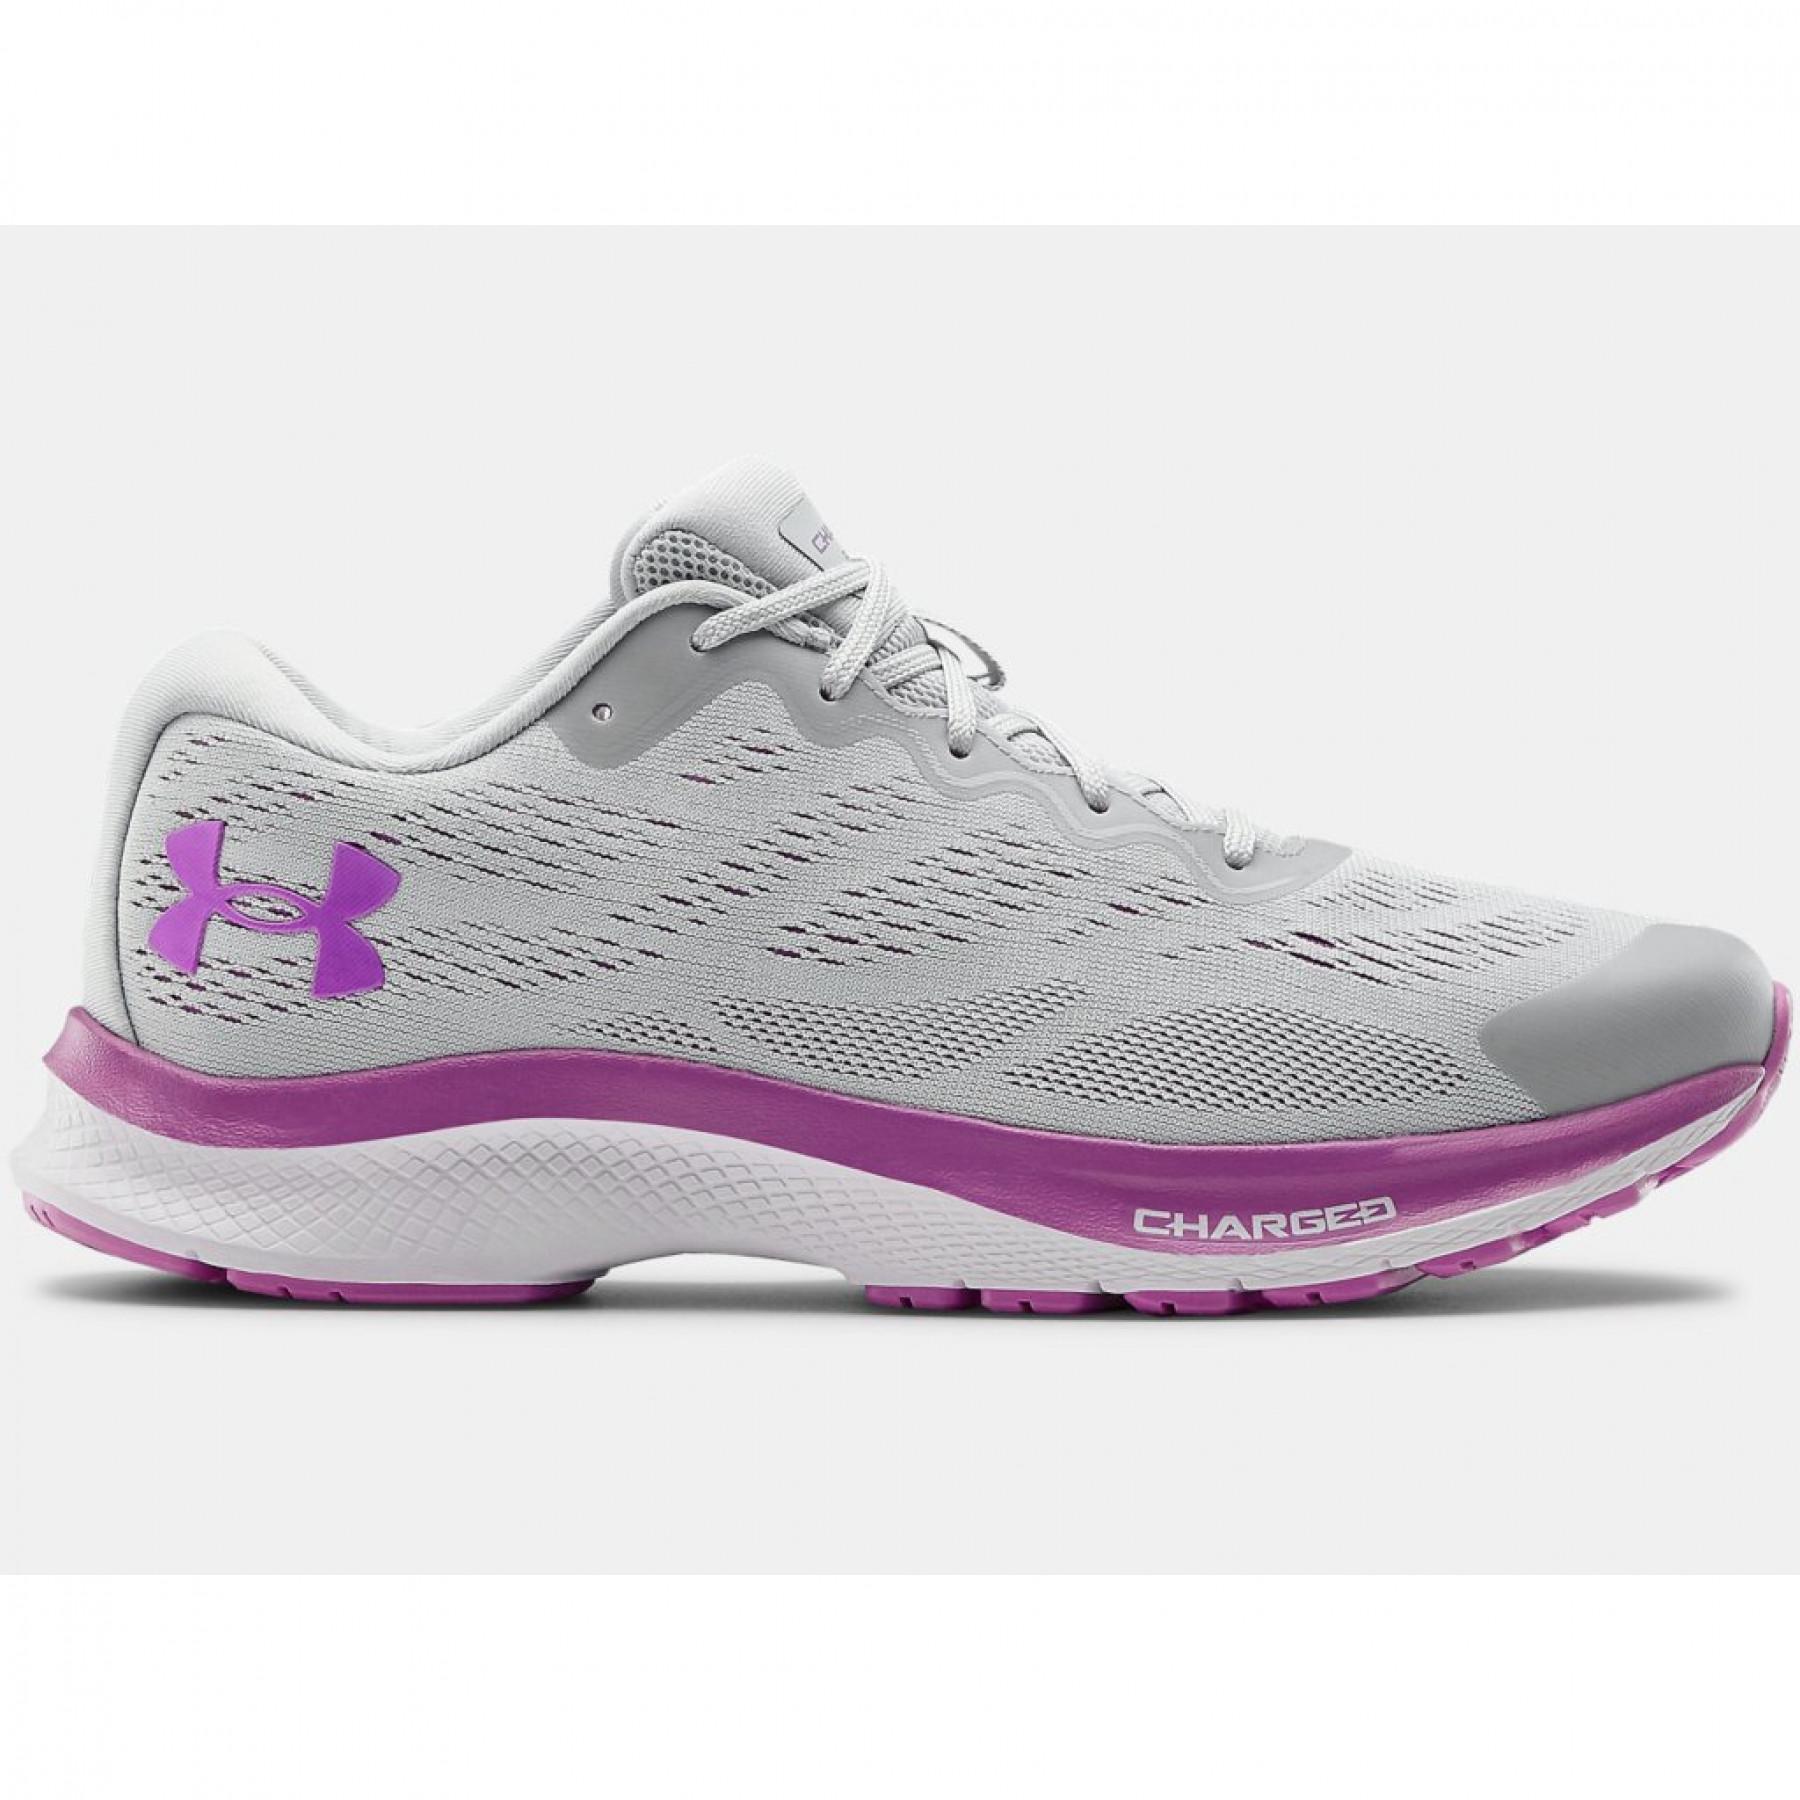 Sapatos de Mulher Under Armour Charged Bandit 6